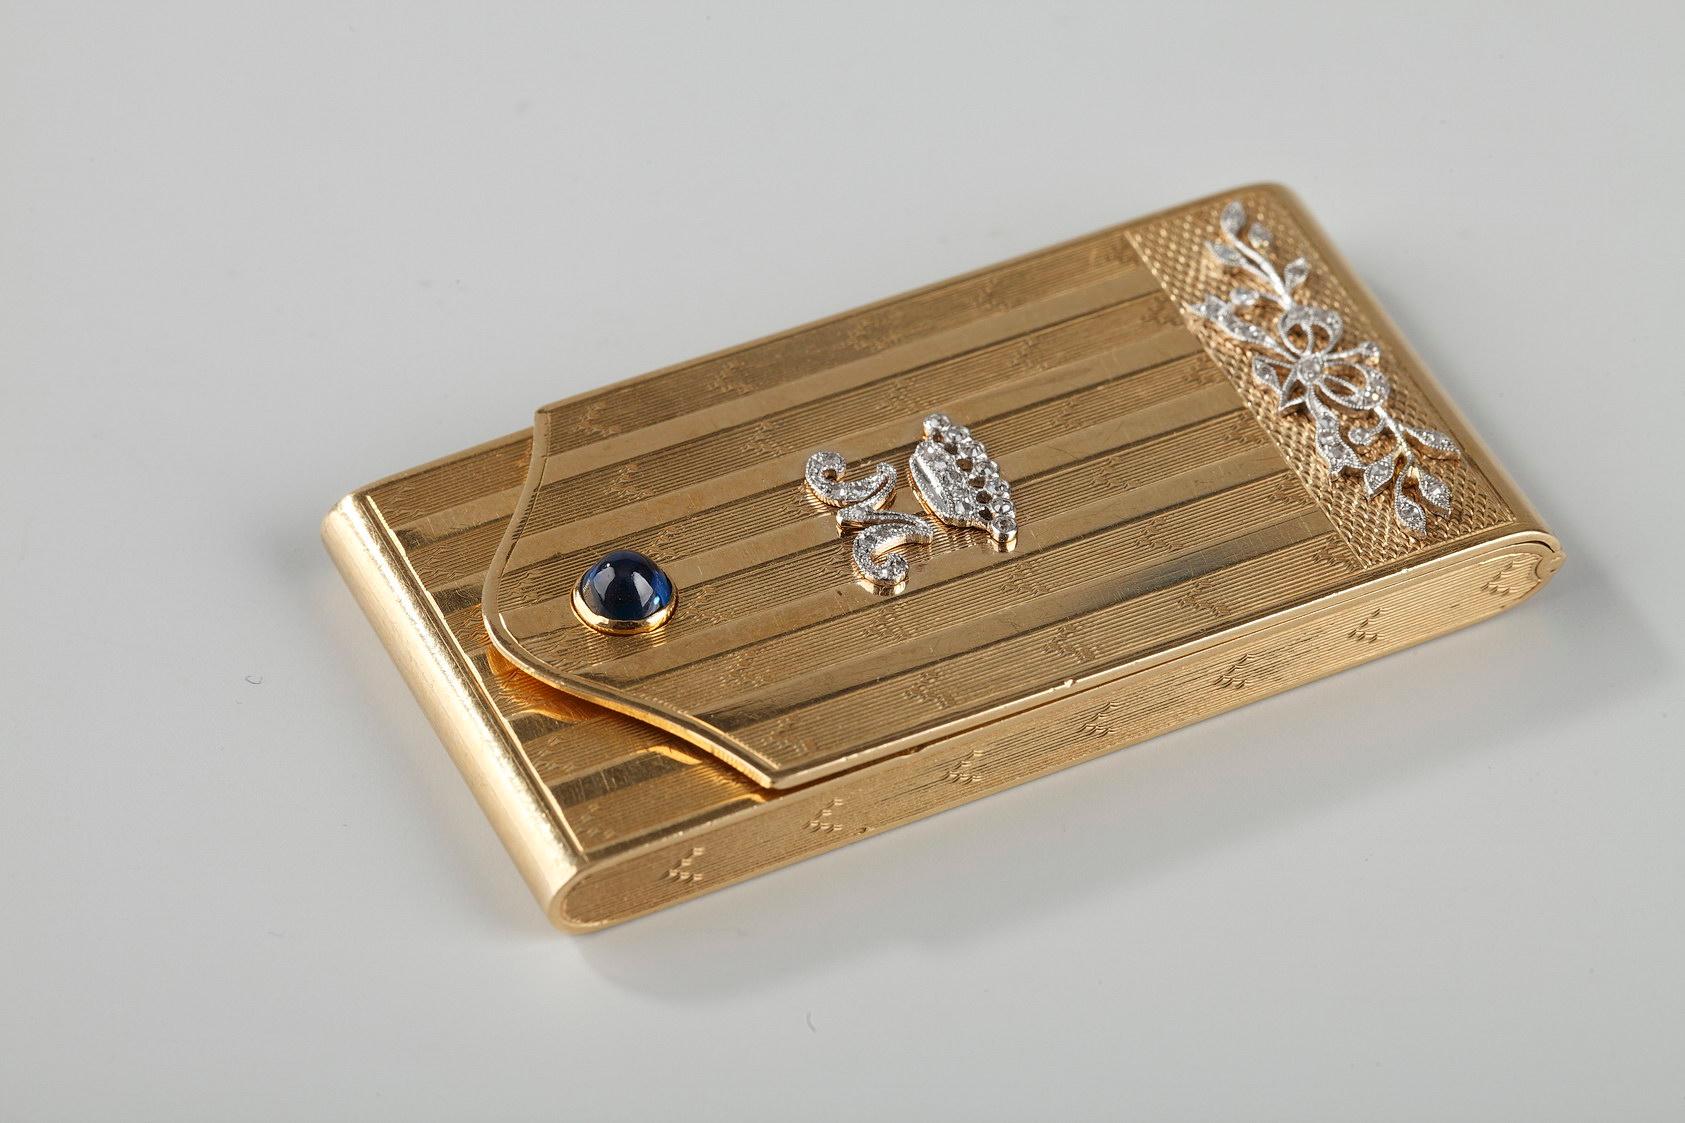 Intricately decorated rectangular gold case. The case opens in the front like a small purse. The entirety of the case is embellished with intricate geometric patterns of parallel stripes alternating with bands of polished gold. The upper part of the